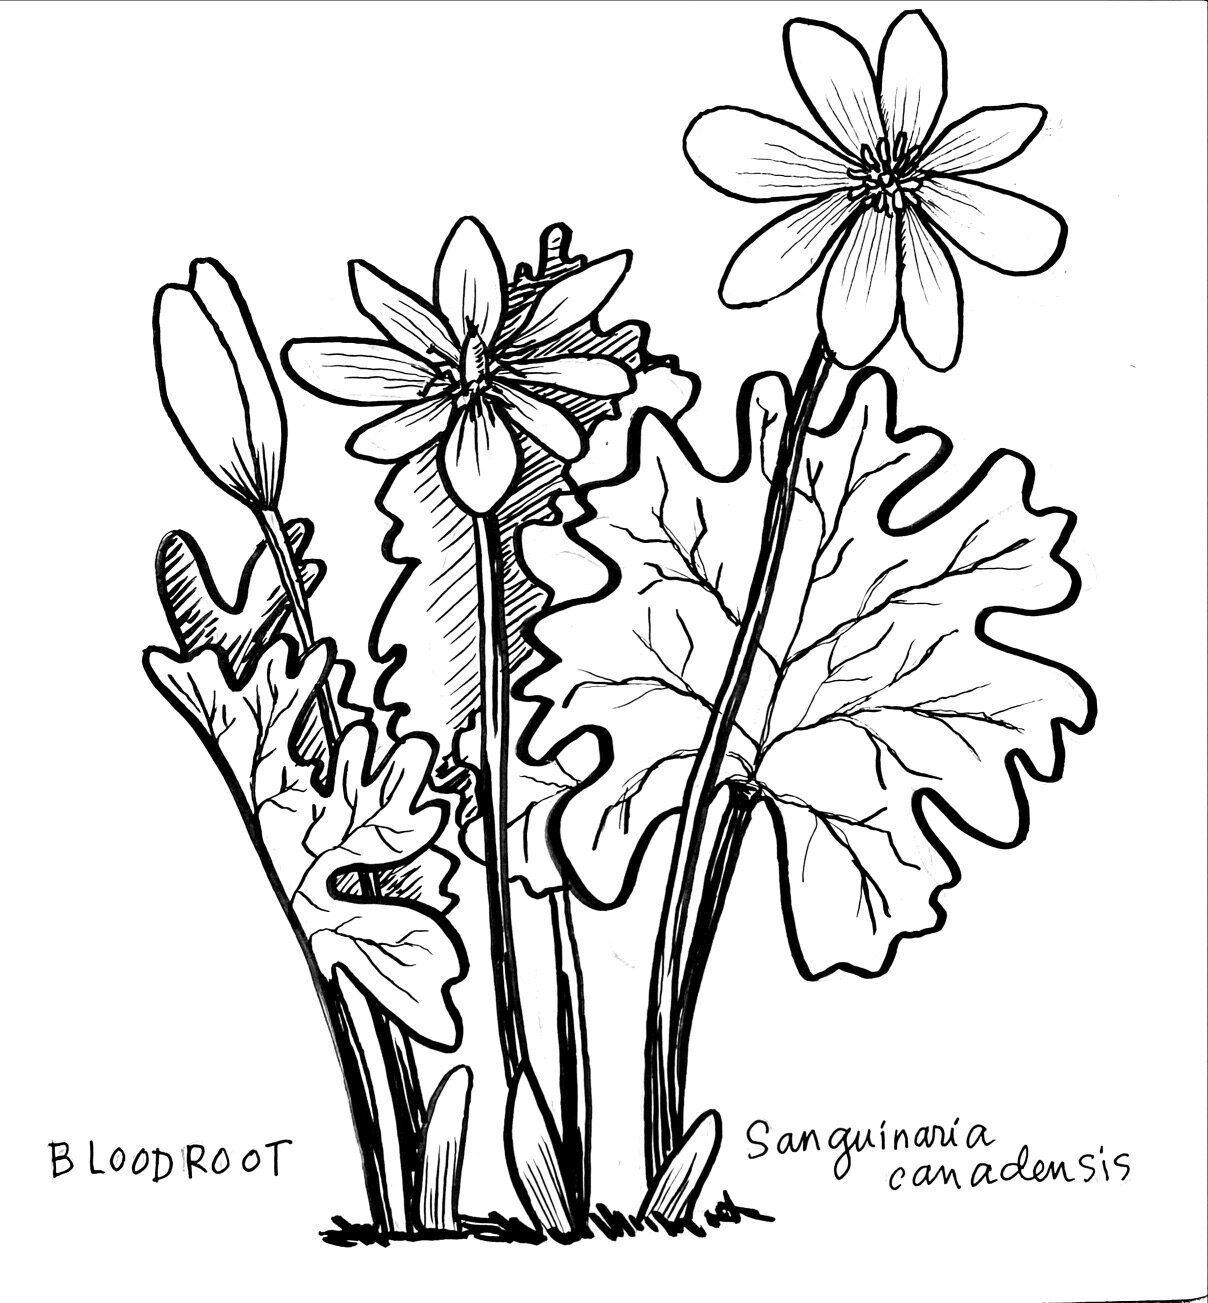 Day 5. Bloodroot. Continuing with the subtheme of spring ephemerals. These are also called &quot;Indian Paint&quot; and &quot;Snakebite&quot;. Their name comes from the orangey-red juice in their leaves and stems. One flower, one leaf per plant. 

#3